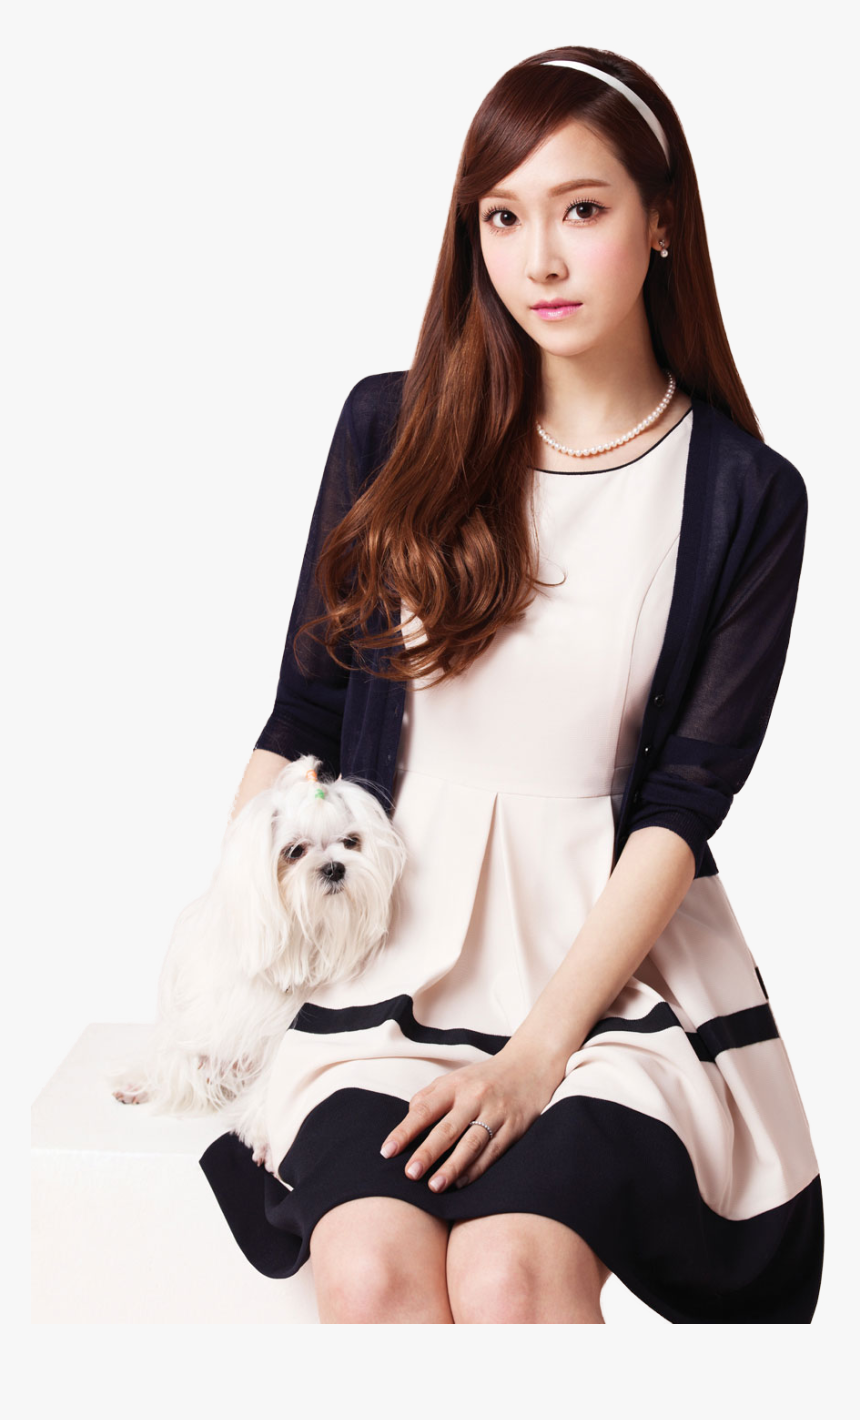 Jessica And Taeyeon - Jessica Jung Png, Transparent Png, Free Download